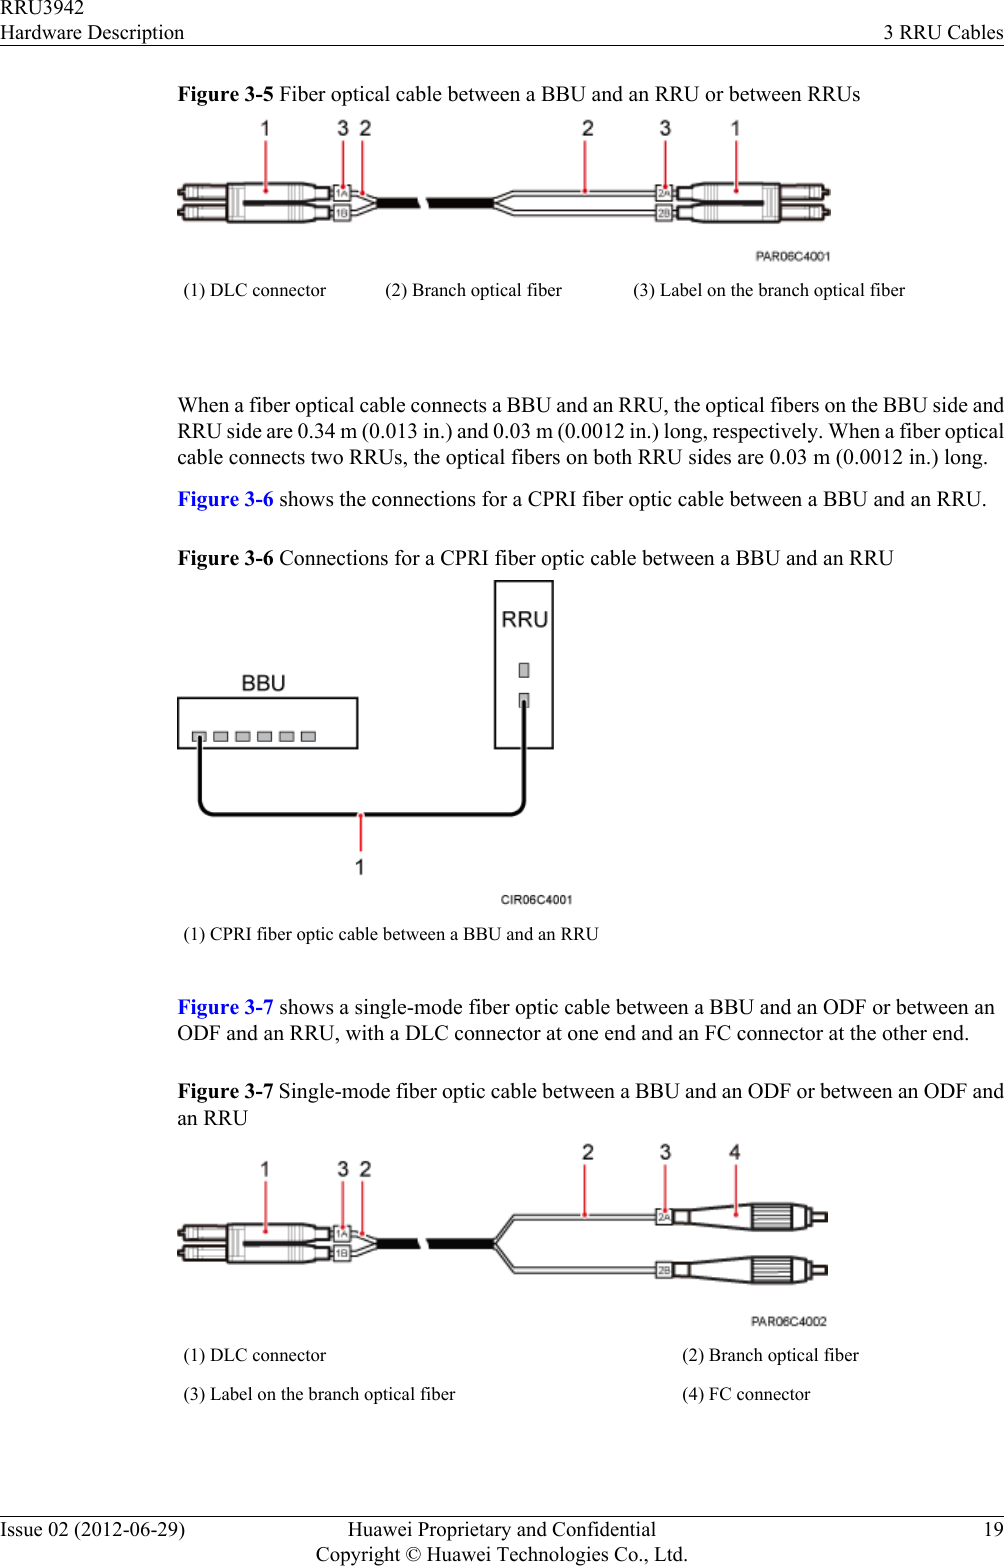 Figure 3-5 Fiber optical cable between a BBU and an RRU or between RRUs(1) DLC connector (2) Branch optical fiber (3) Label on the branch optical fiber When a fiber optical cable connects a BBU and an RRU, the optical fibers on the BBU side andRRU side are 0.34 m (0.013 in.) and 0.03 m (0.0012 in.) long, respectively. When a fiber opticalcable connects two RRUs, the optical fibers on both RRU sides are 0.03 m (0.0012 in.) long.Figure 3-6 shows the connections for a CPRI fiber optic cable between a BBU and an RRU.Figure 3-6 Connections for a CPRI fiber optic cable between a BBU and an RRU(1) CPRI fiber optic cable between a BBU and an RRUFigure 3-7 shows a single-mode fiber optic cable between a BBU and an ODF or between anODF and an RRU, with a DLC connector at one end and an FC connector at the other end.Figure 3-7 Single-mode fiber optic cable between a BBU and an ODF or between an ODF andan RRU(1) DLC connector (2) Branch optical fiber(3) Label on the branch optical fiber (4) FC connector RRU3942Hardware Description 3 RRU CablesIssue 02 (2012-06-29) Huawei Proprietary and ConfidentialCopyright © Huawei Technologies Co., Ltd.19